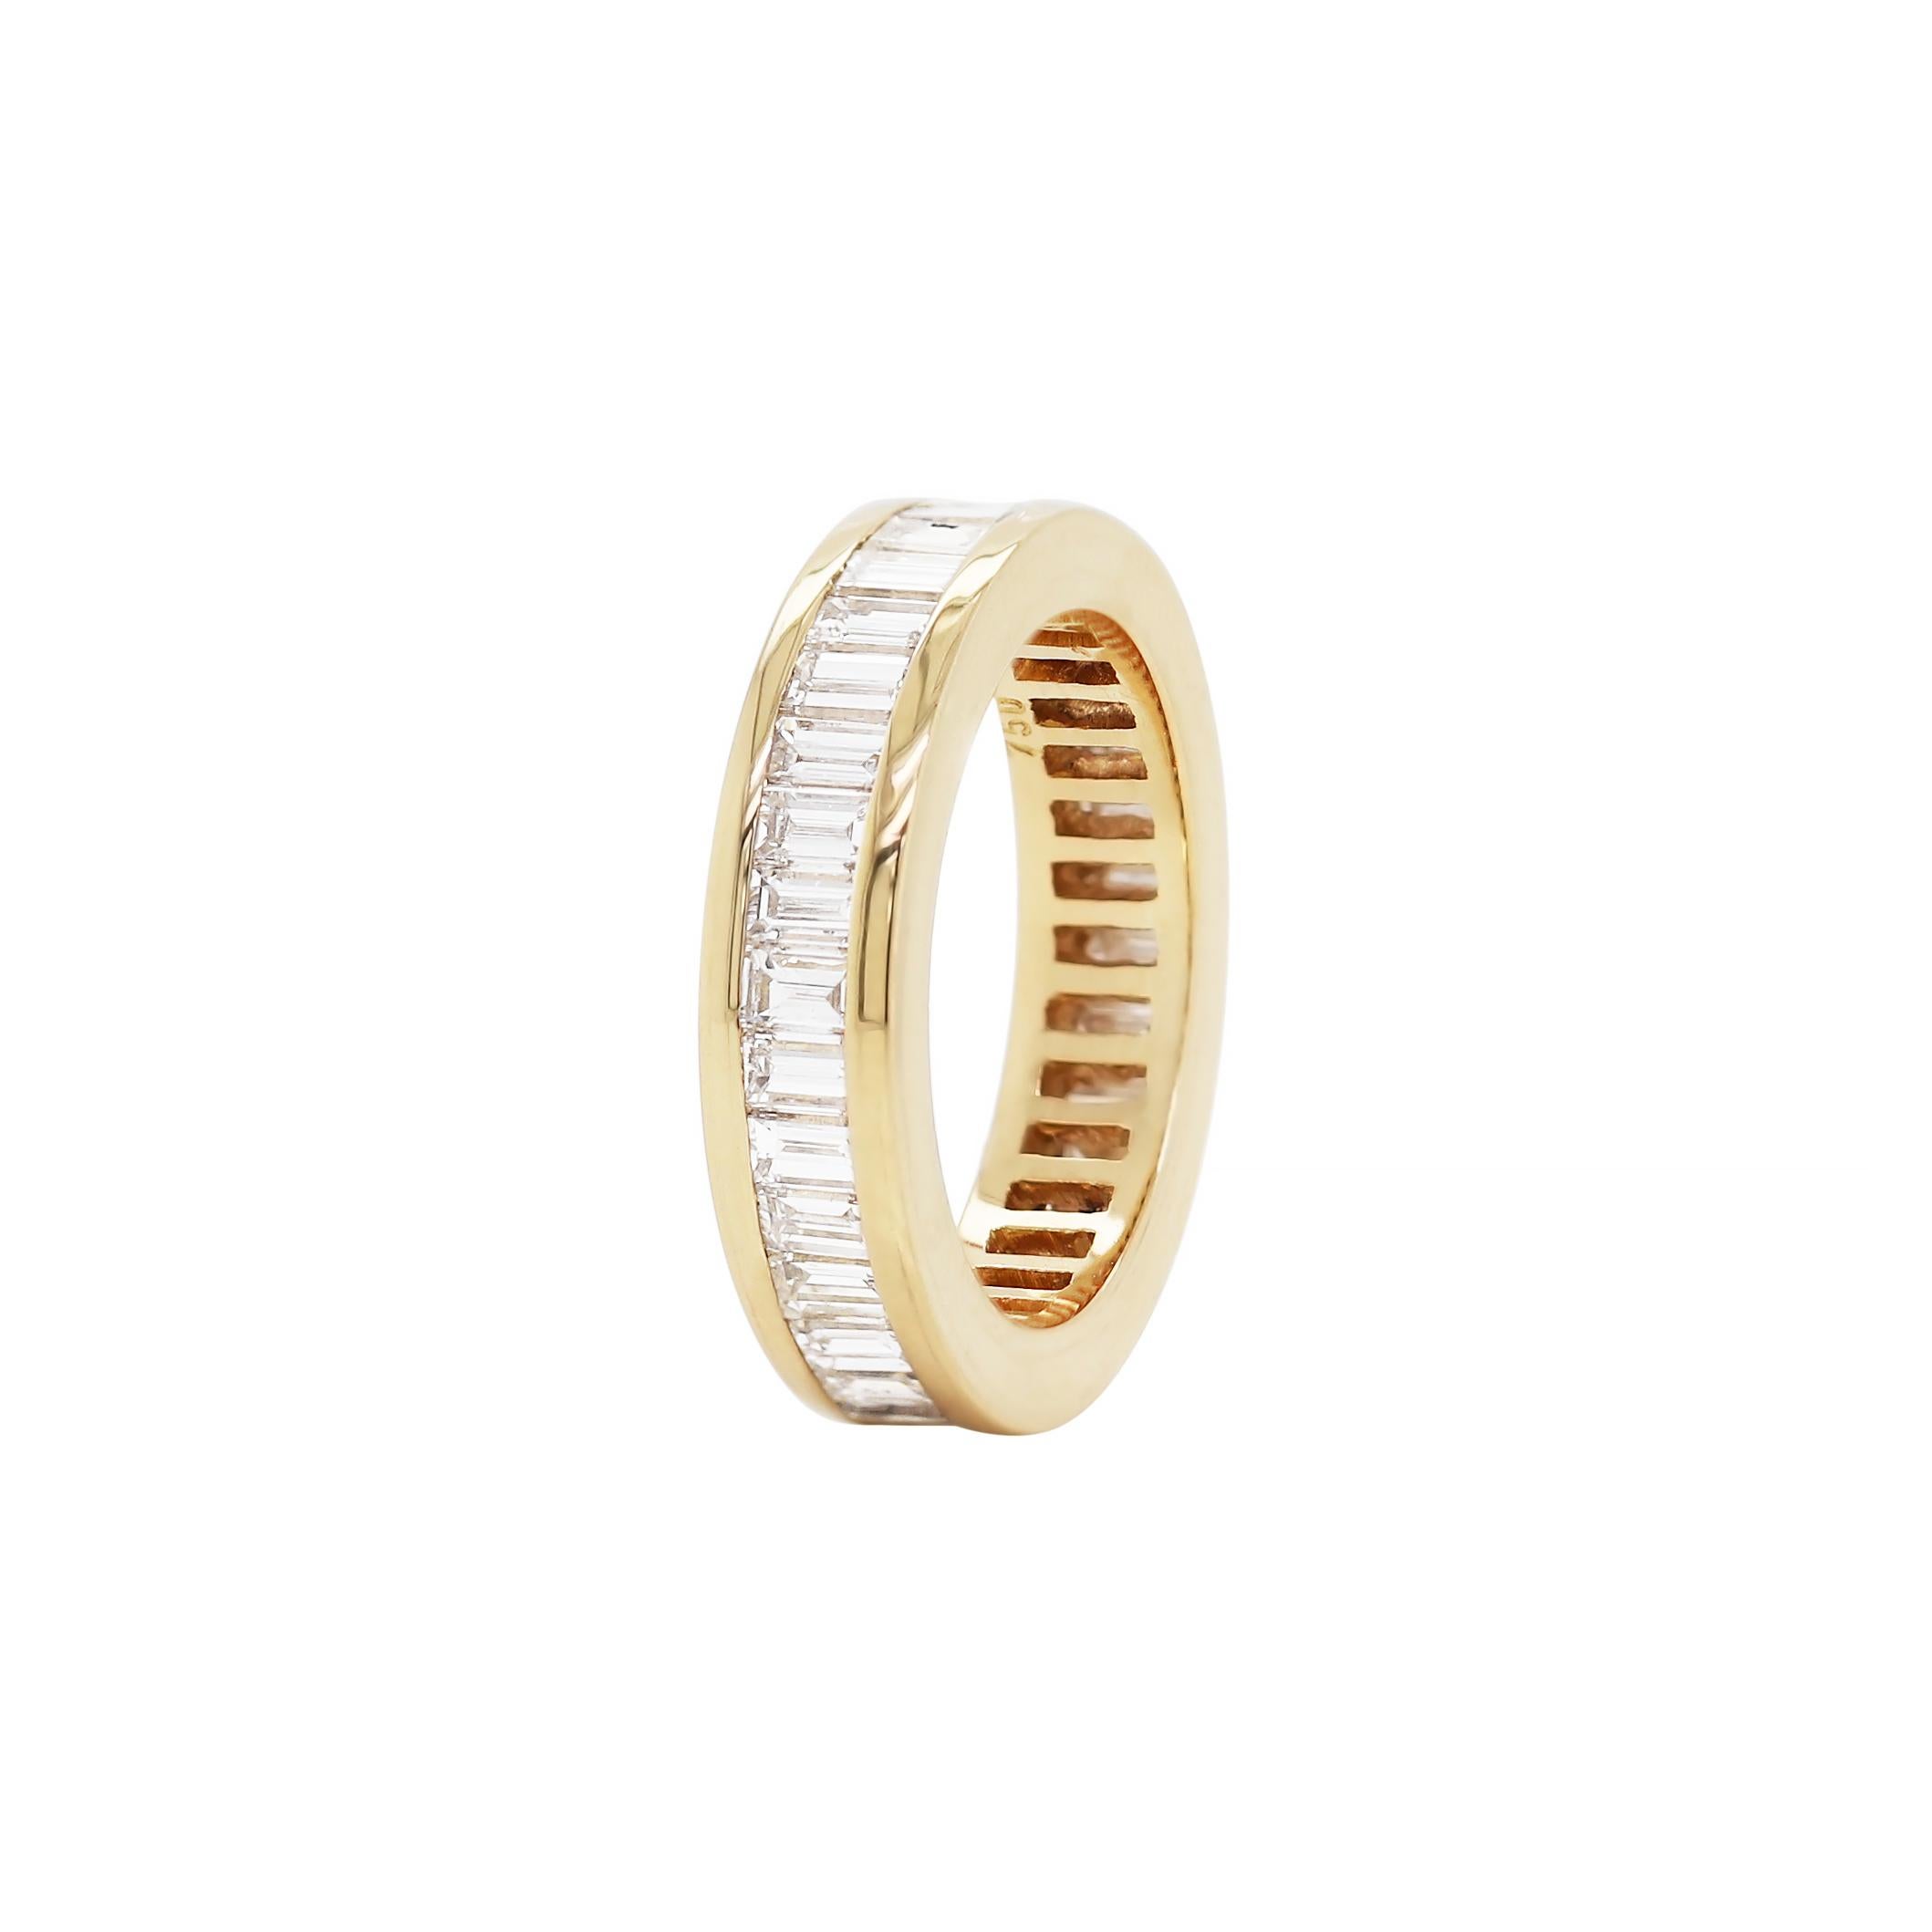 Beautiful eternity ring channel set with 36 fine quality baguette cut diamonds with a total approximate weight of 3.00ct, all mounted in 18ct yellow gold. The ring weighs 7.6gr and measures 5.2mm. Stamped 750. UK finger size ‘N’.